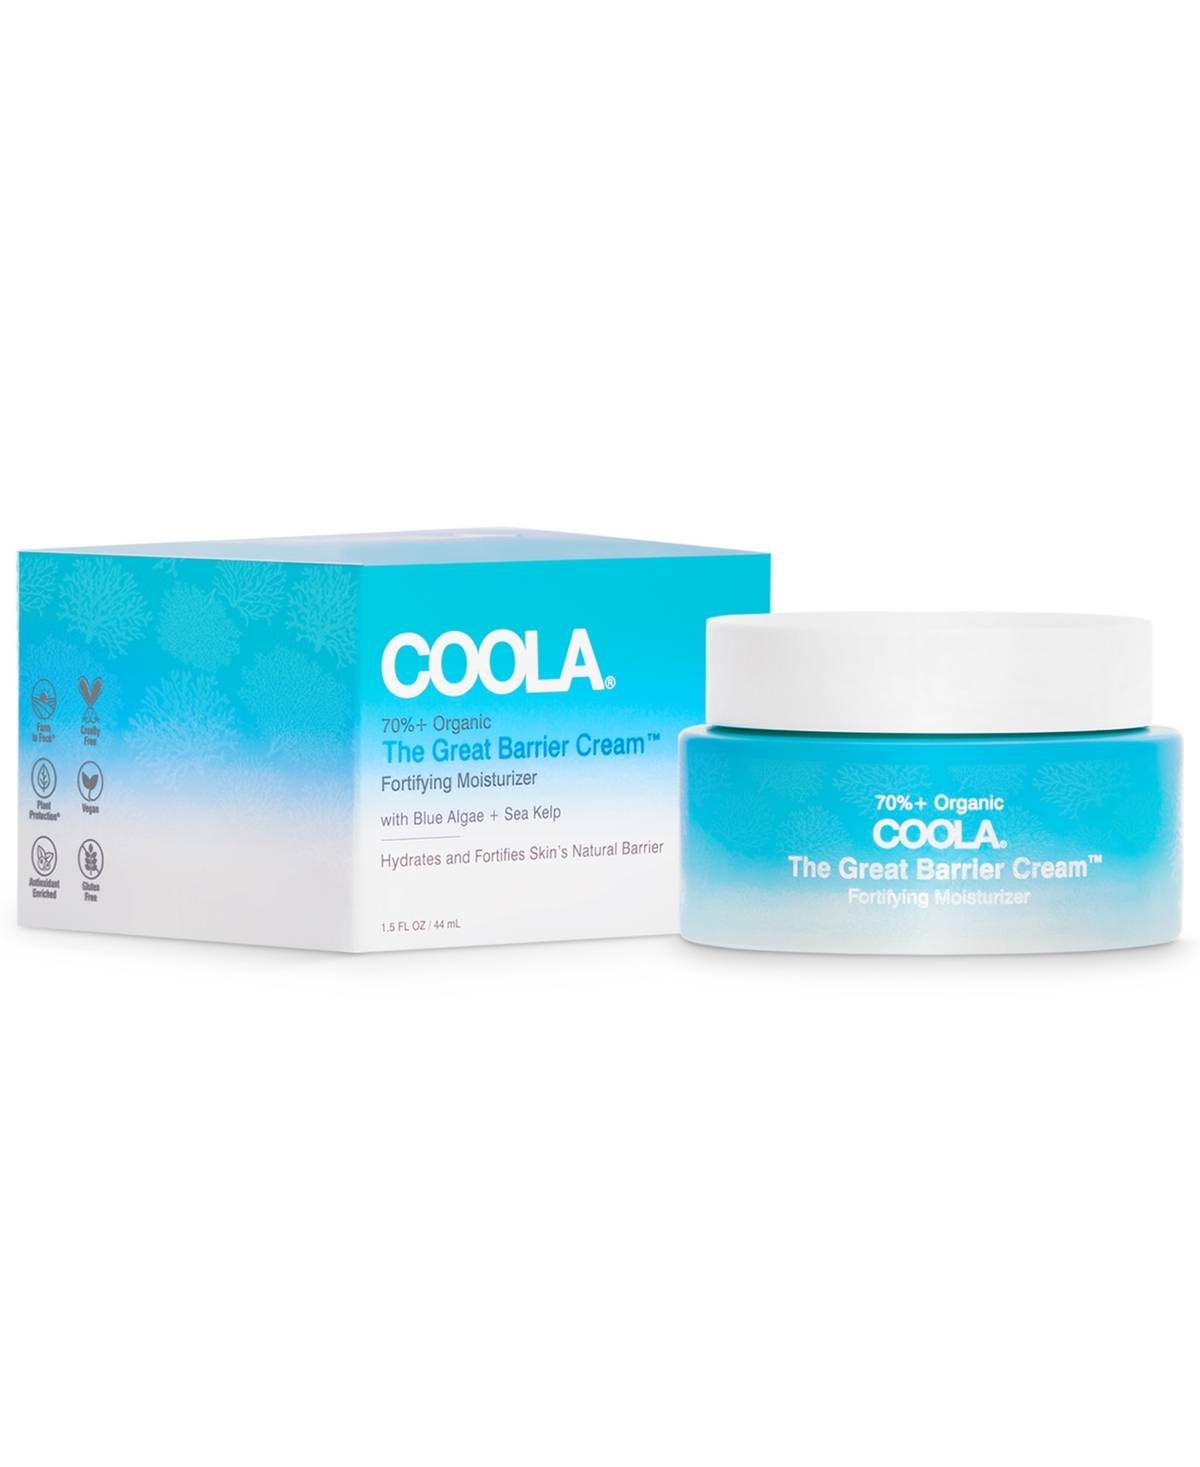 Coola The Great Barrier Cream Organic Fortifying Moisturizer, 1.5-oz.